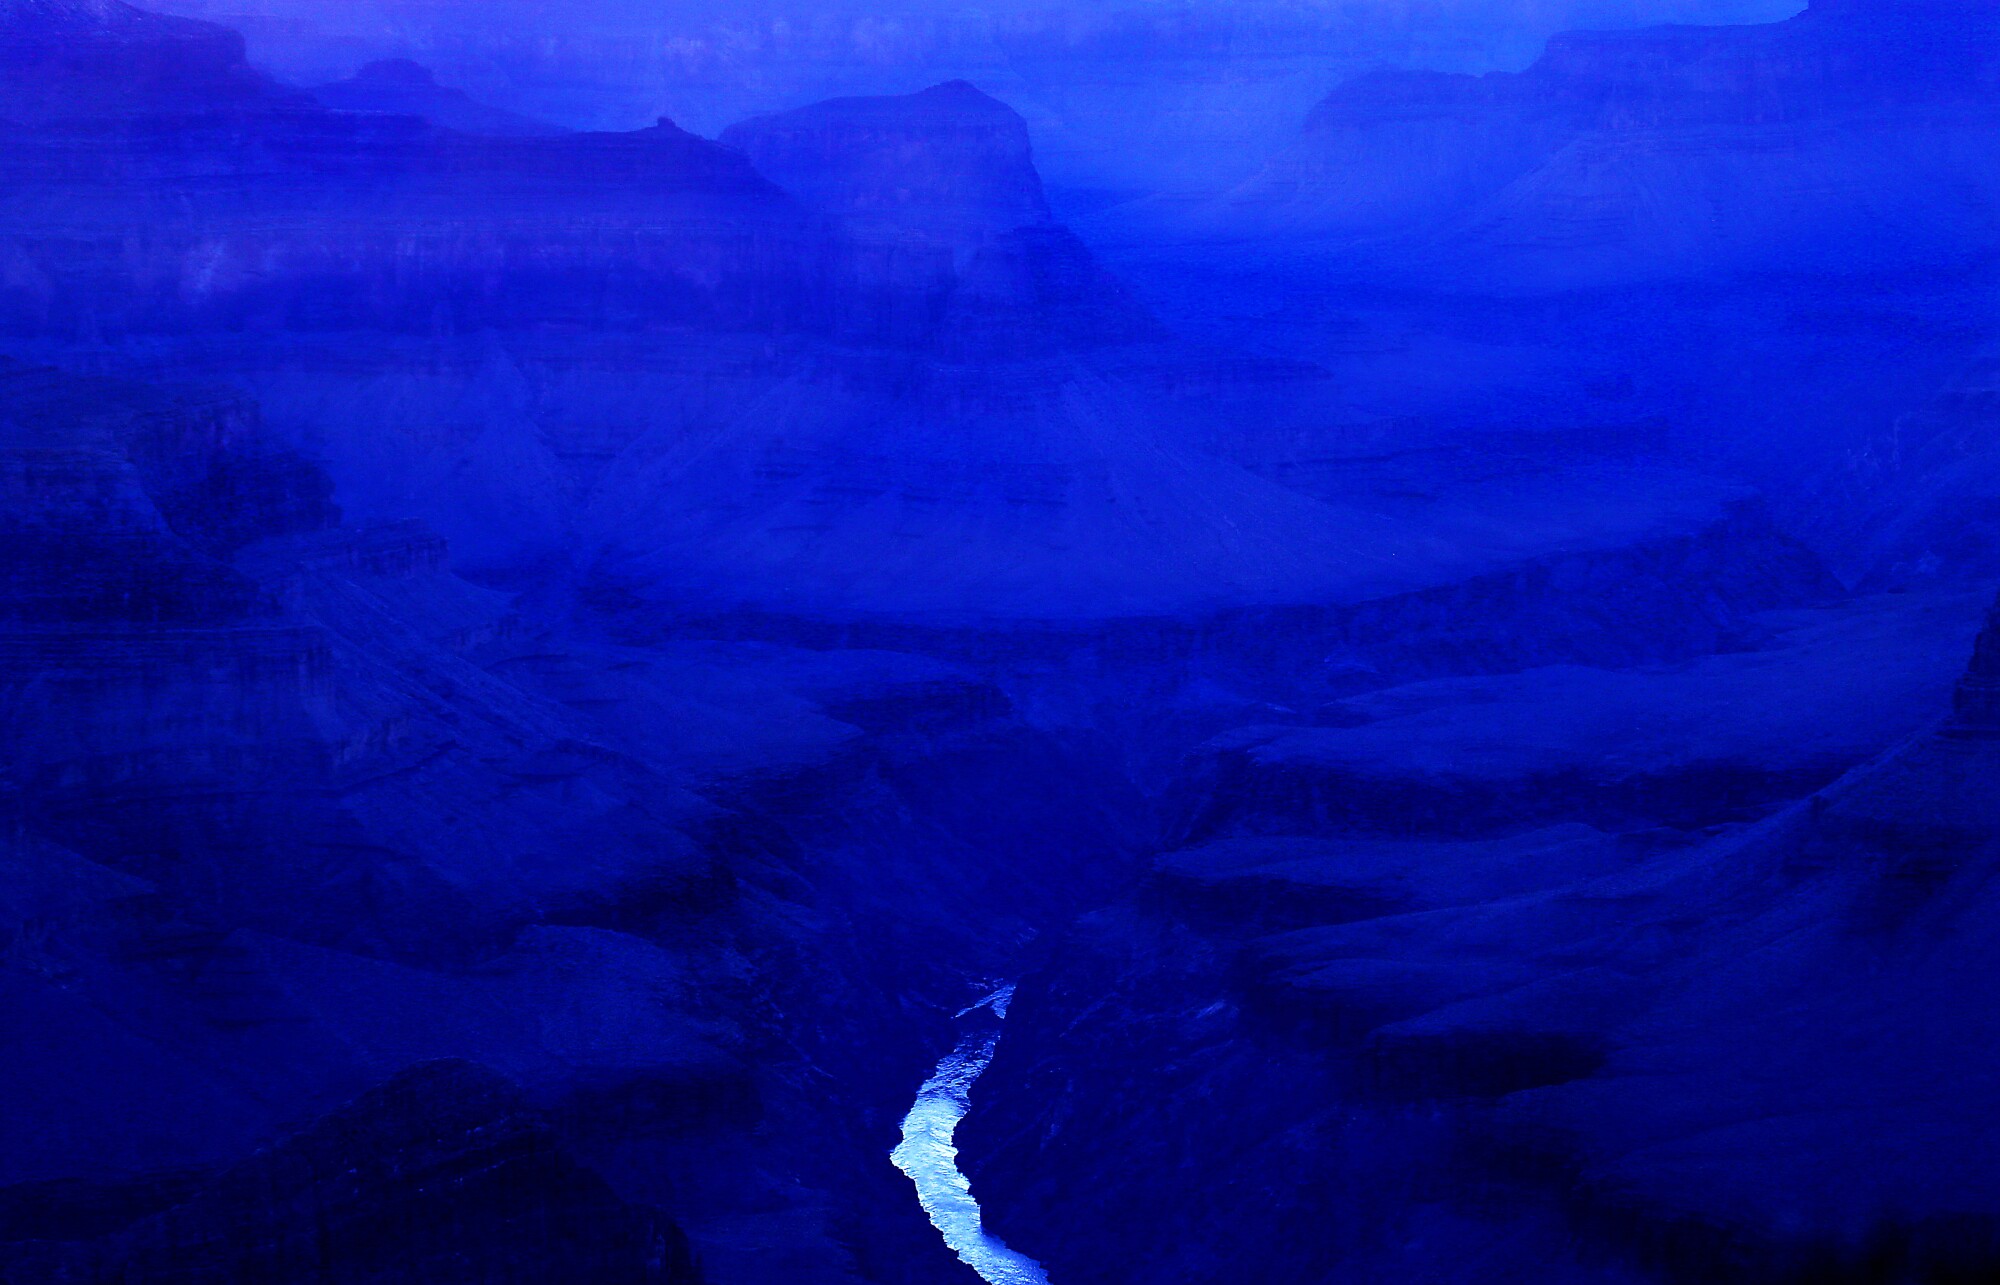 The Colorado River cuts through the Grand Canyon in a blue-tinted image